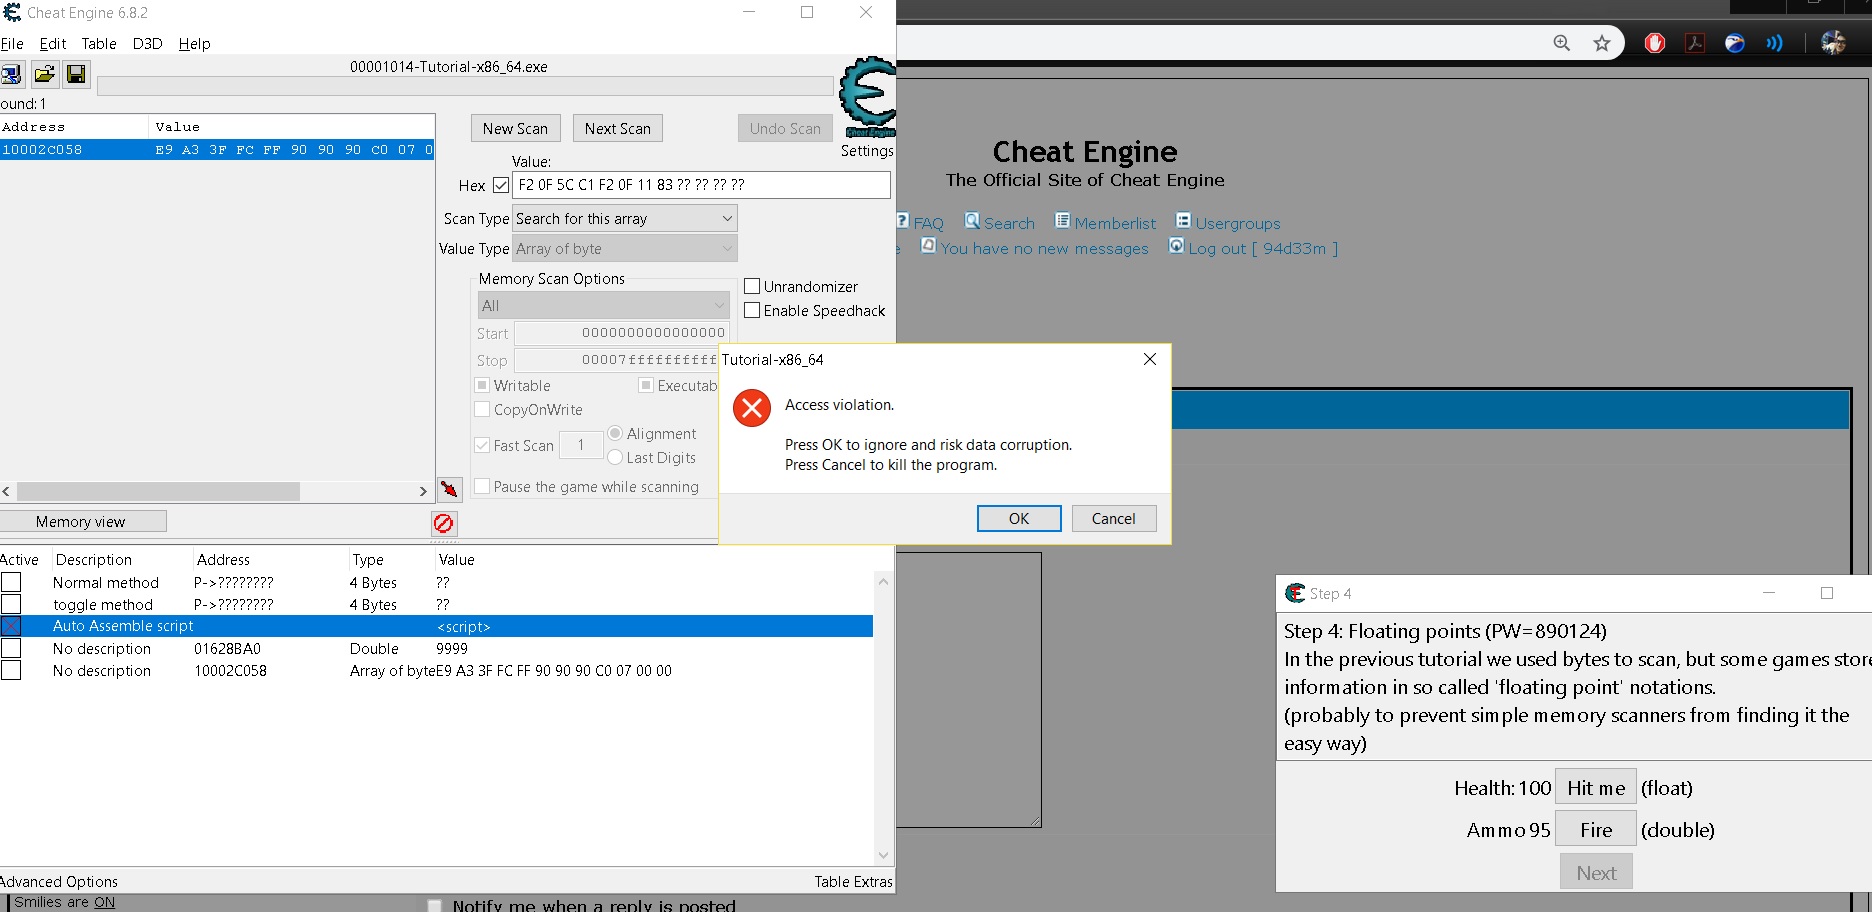 Cheat Engine :: View topic - Access violation when enabling AOB script